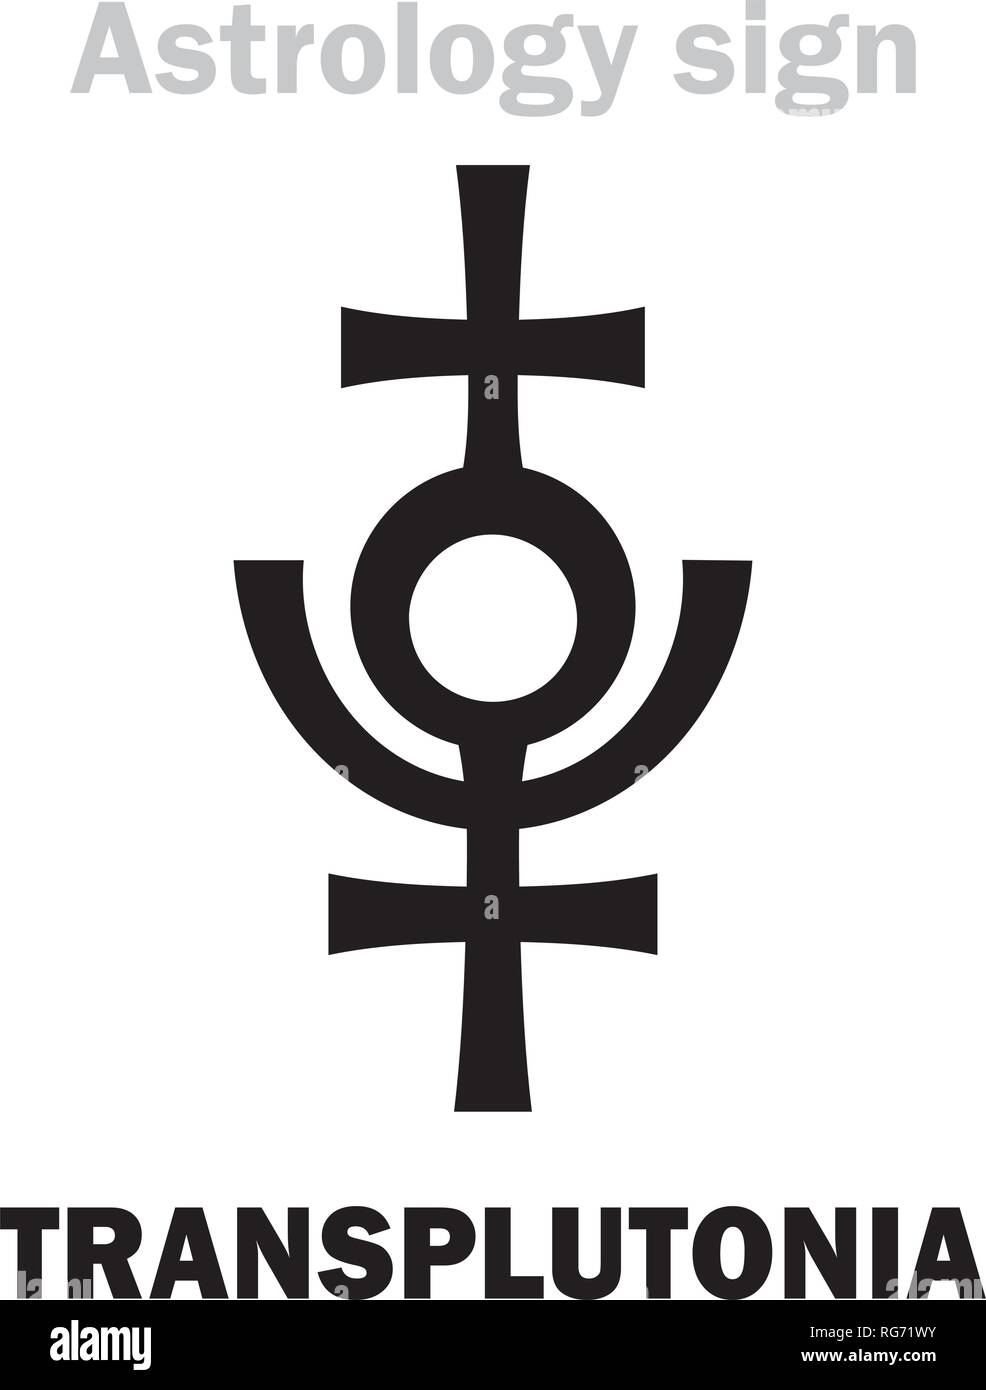 Astrology Alphabet: TRANSPLUTONIA (Planet X, Proserpina/Persephone), 12th hypothetical planet in the Solar System (beyond Pluto). Hieroglyphics sign. Stock Vector